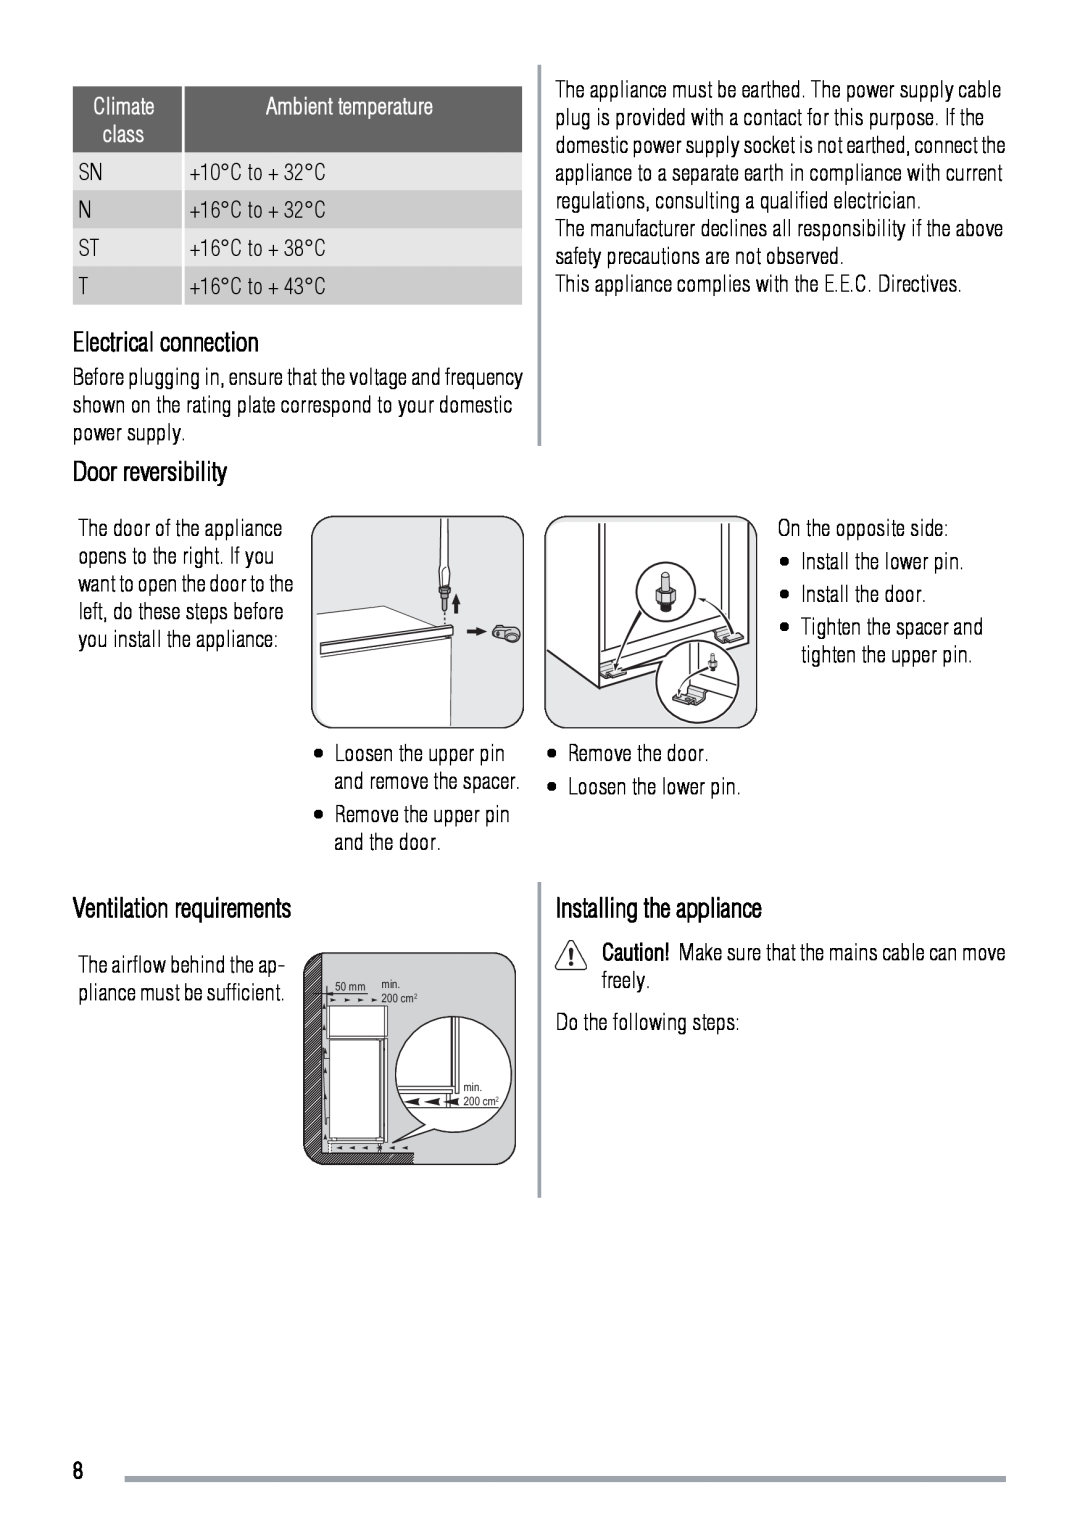 Zanussi ZBA7190A user manual Electrical connection, Door reversibility, Installing the appliance, Climate, class 